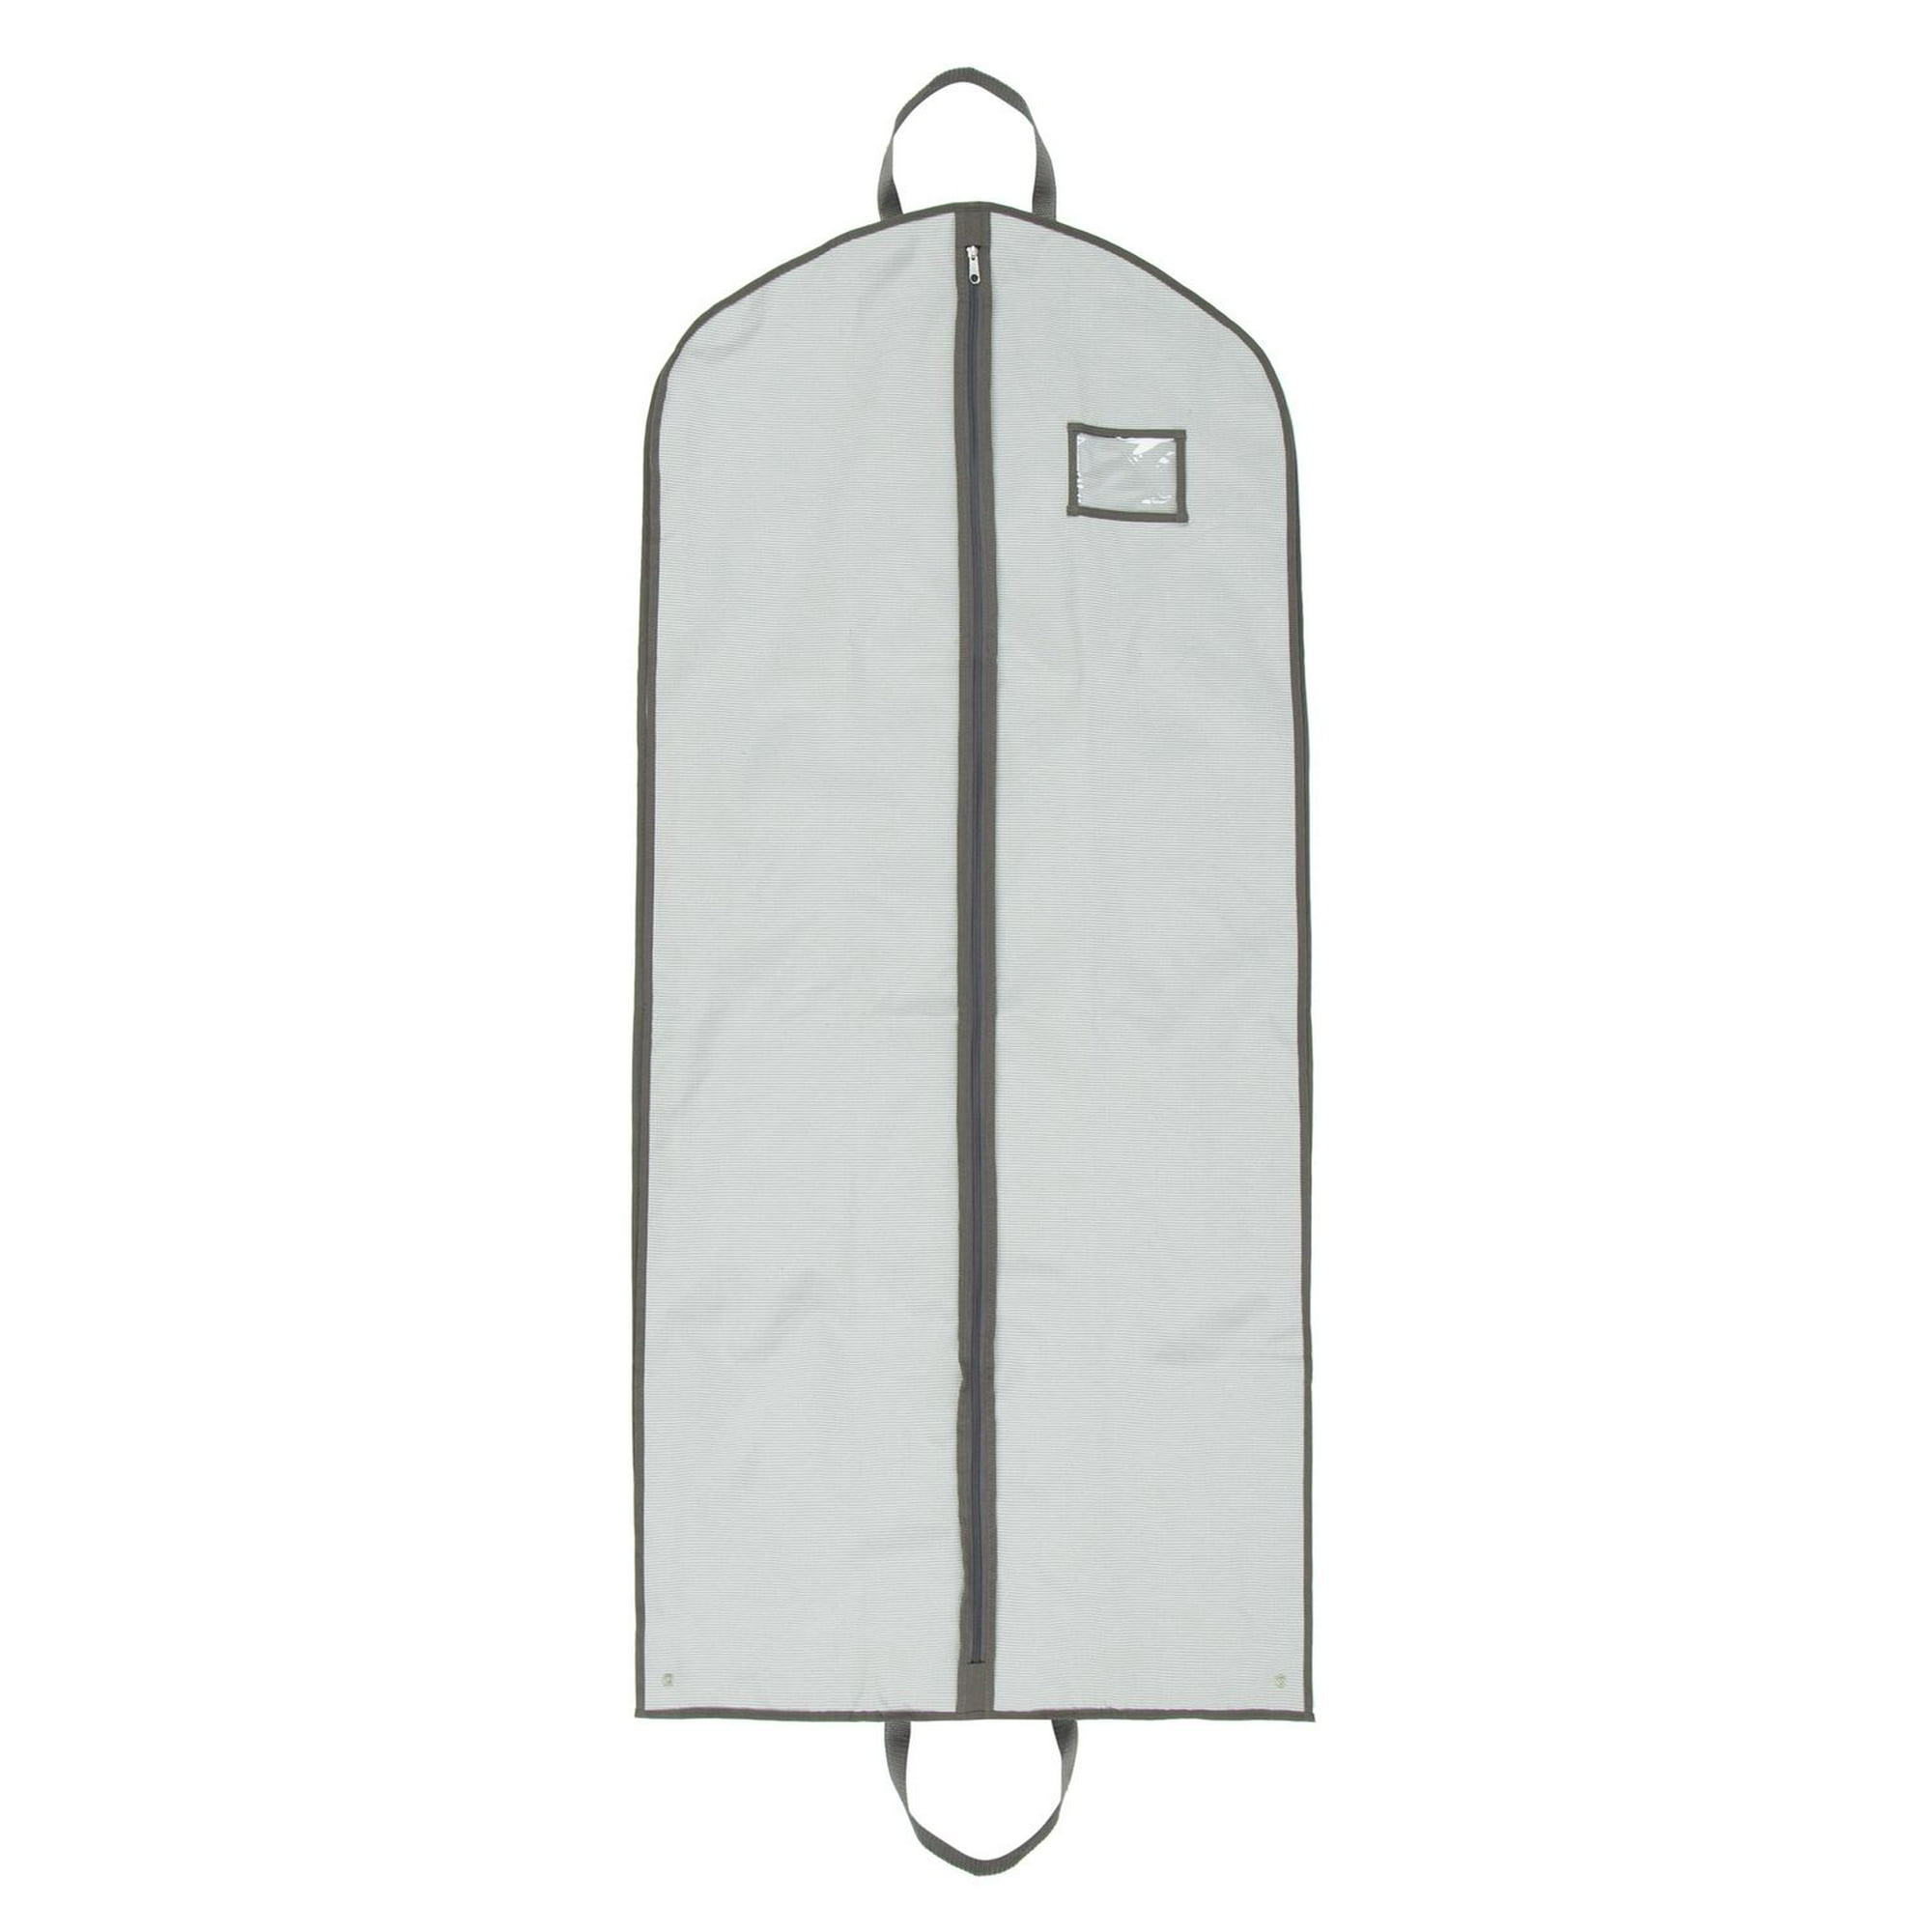 Mainstays Garment Bag for Travel and Storage, Breathable, with Zipper,  Carry Handles for Folding for Suits Dresses Coats, Grey, Item size:24  W x  3  D x 54  H; Grey color 